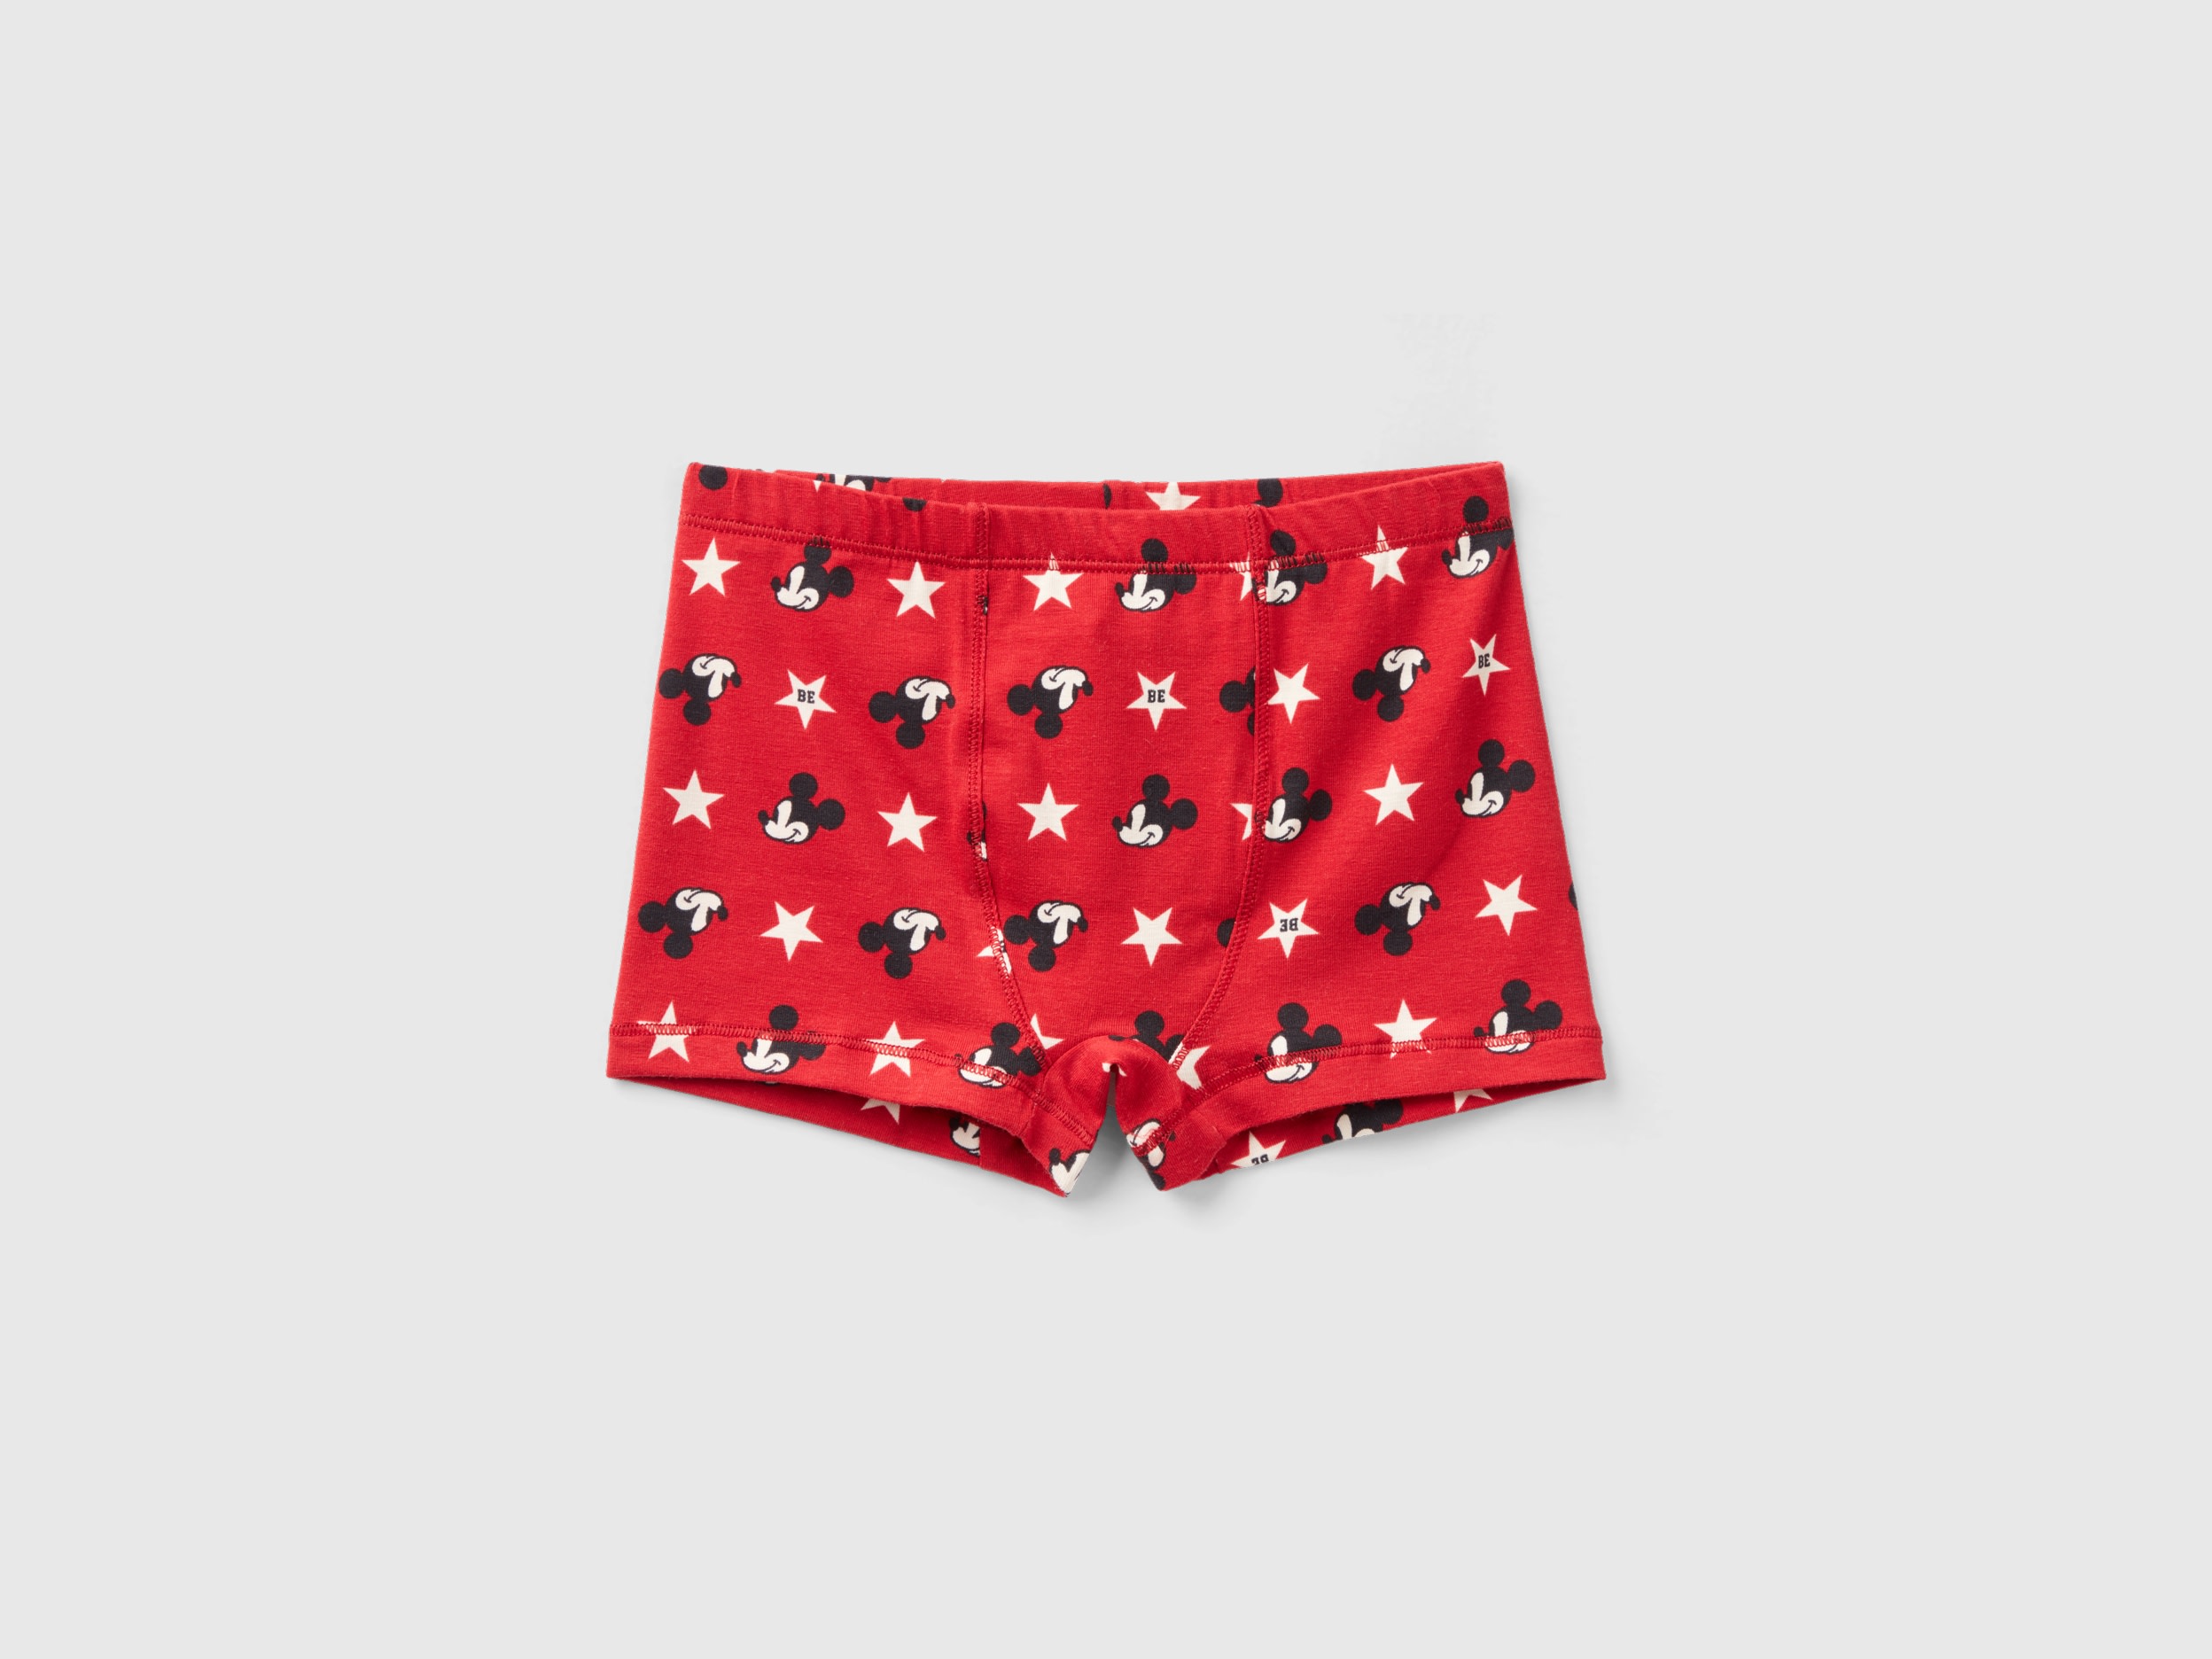 Benetton, Red Mickey Mouse Boxers, size 2XL, Red, Kids